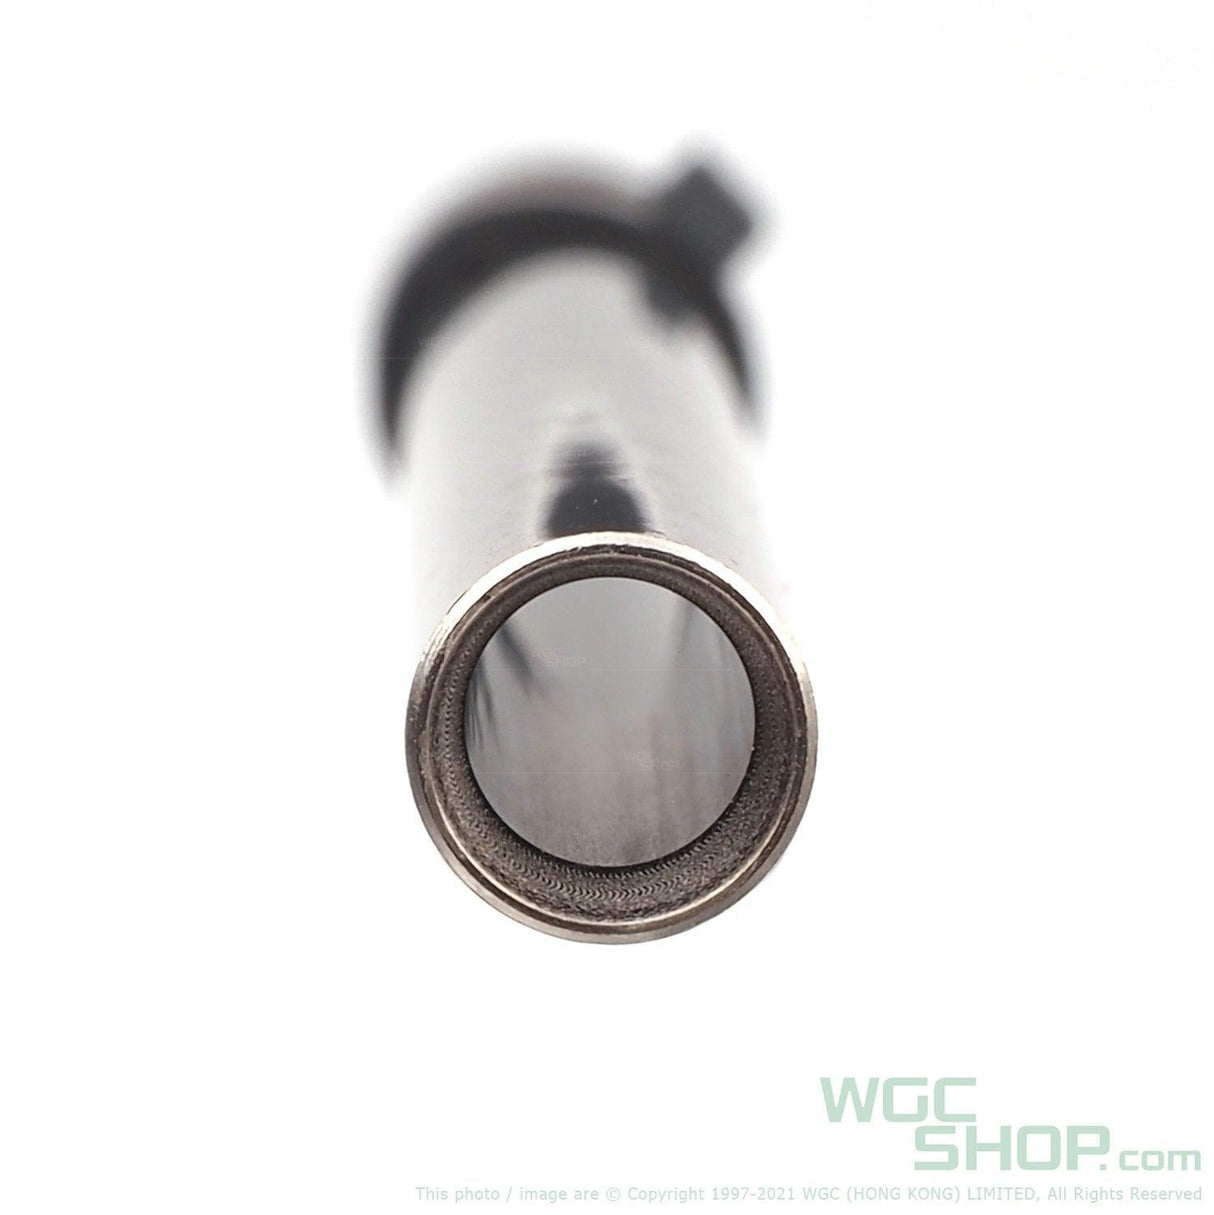 A+ AIRSOFT 6.03 Precision Inner Barrel for GBB Airsoft - WGC Shop